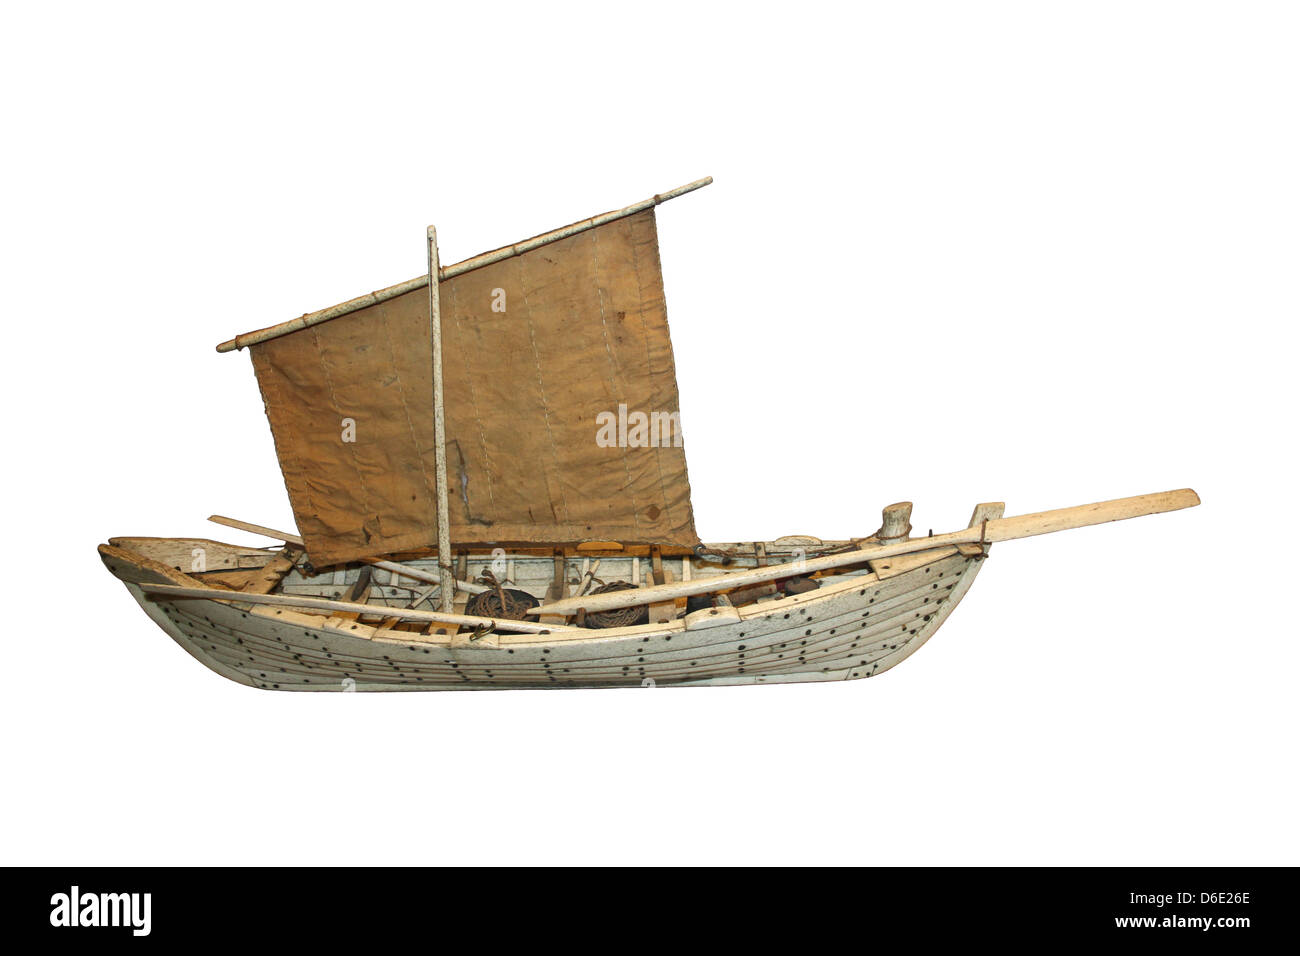 Model Of The Type Of Whaleboat Used In The South Seas For Hunting Sperm Whales - It Is Made from Sperm Whale Jaw Bone Stock Photo